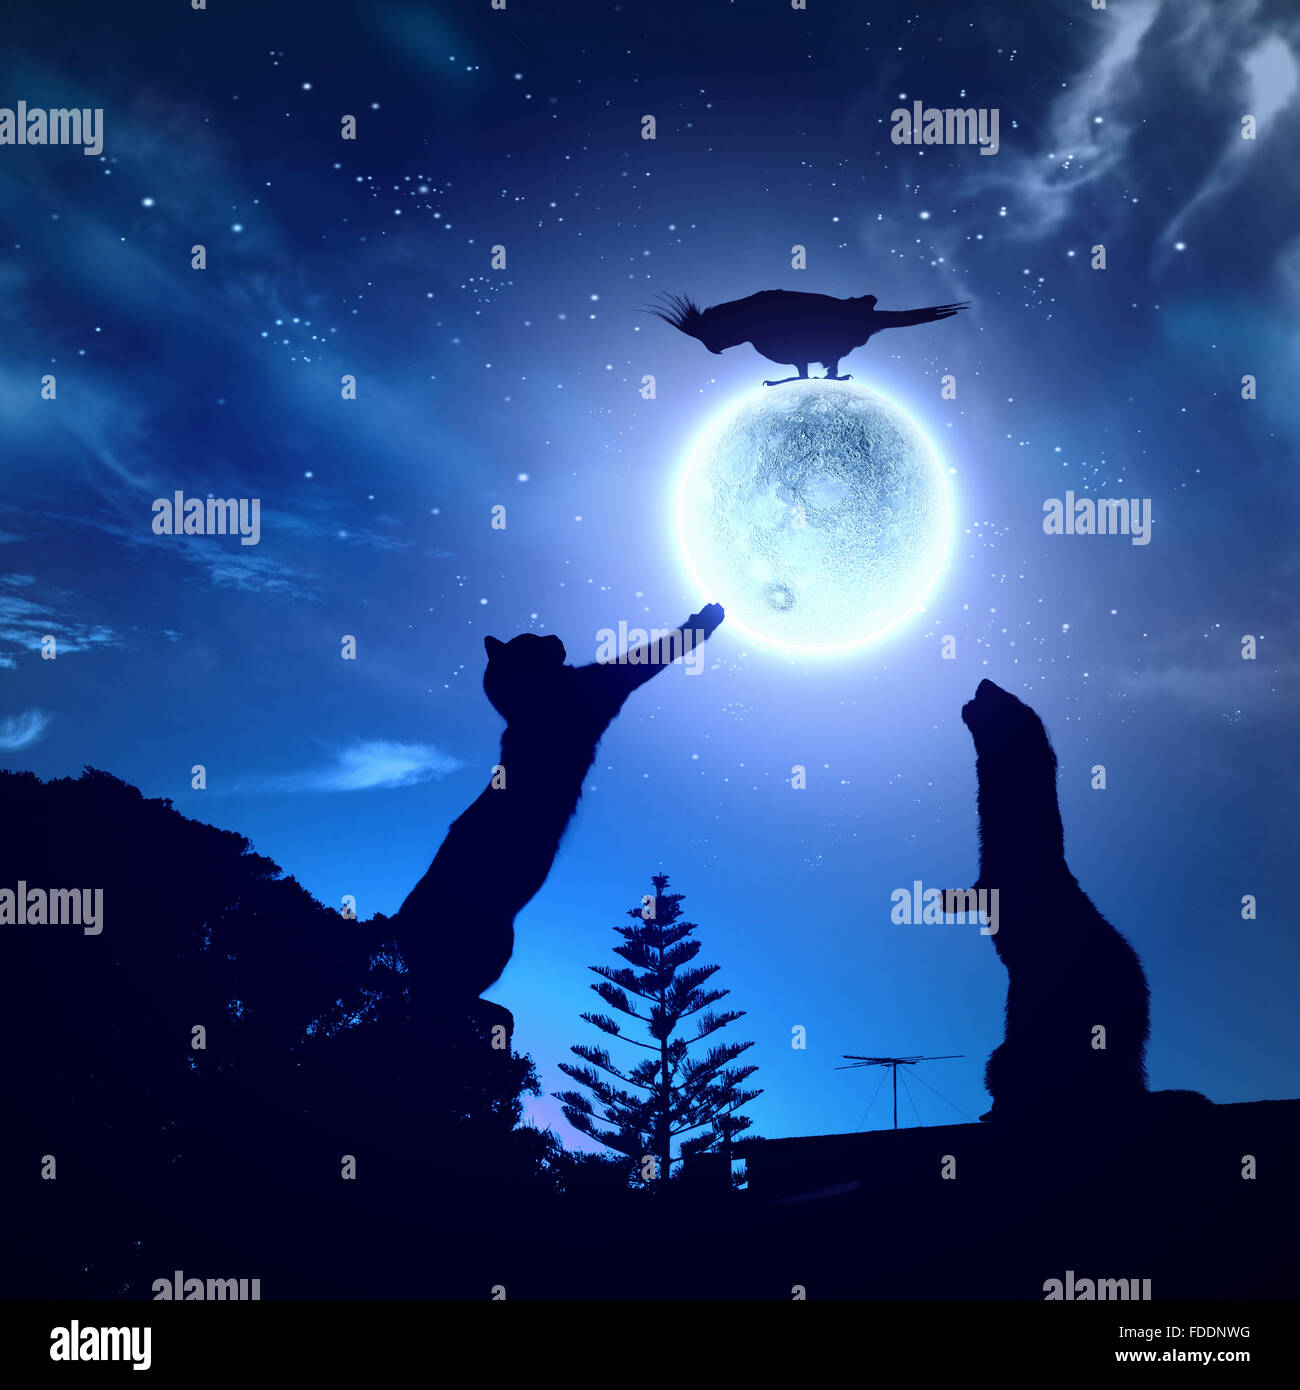 Silhouettes of animals in night sky with full moon Stock Photo